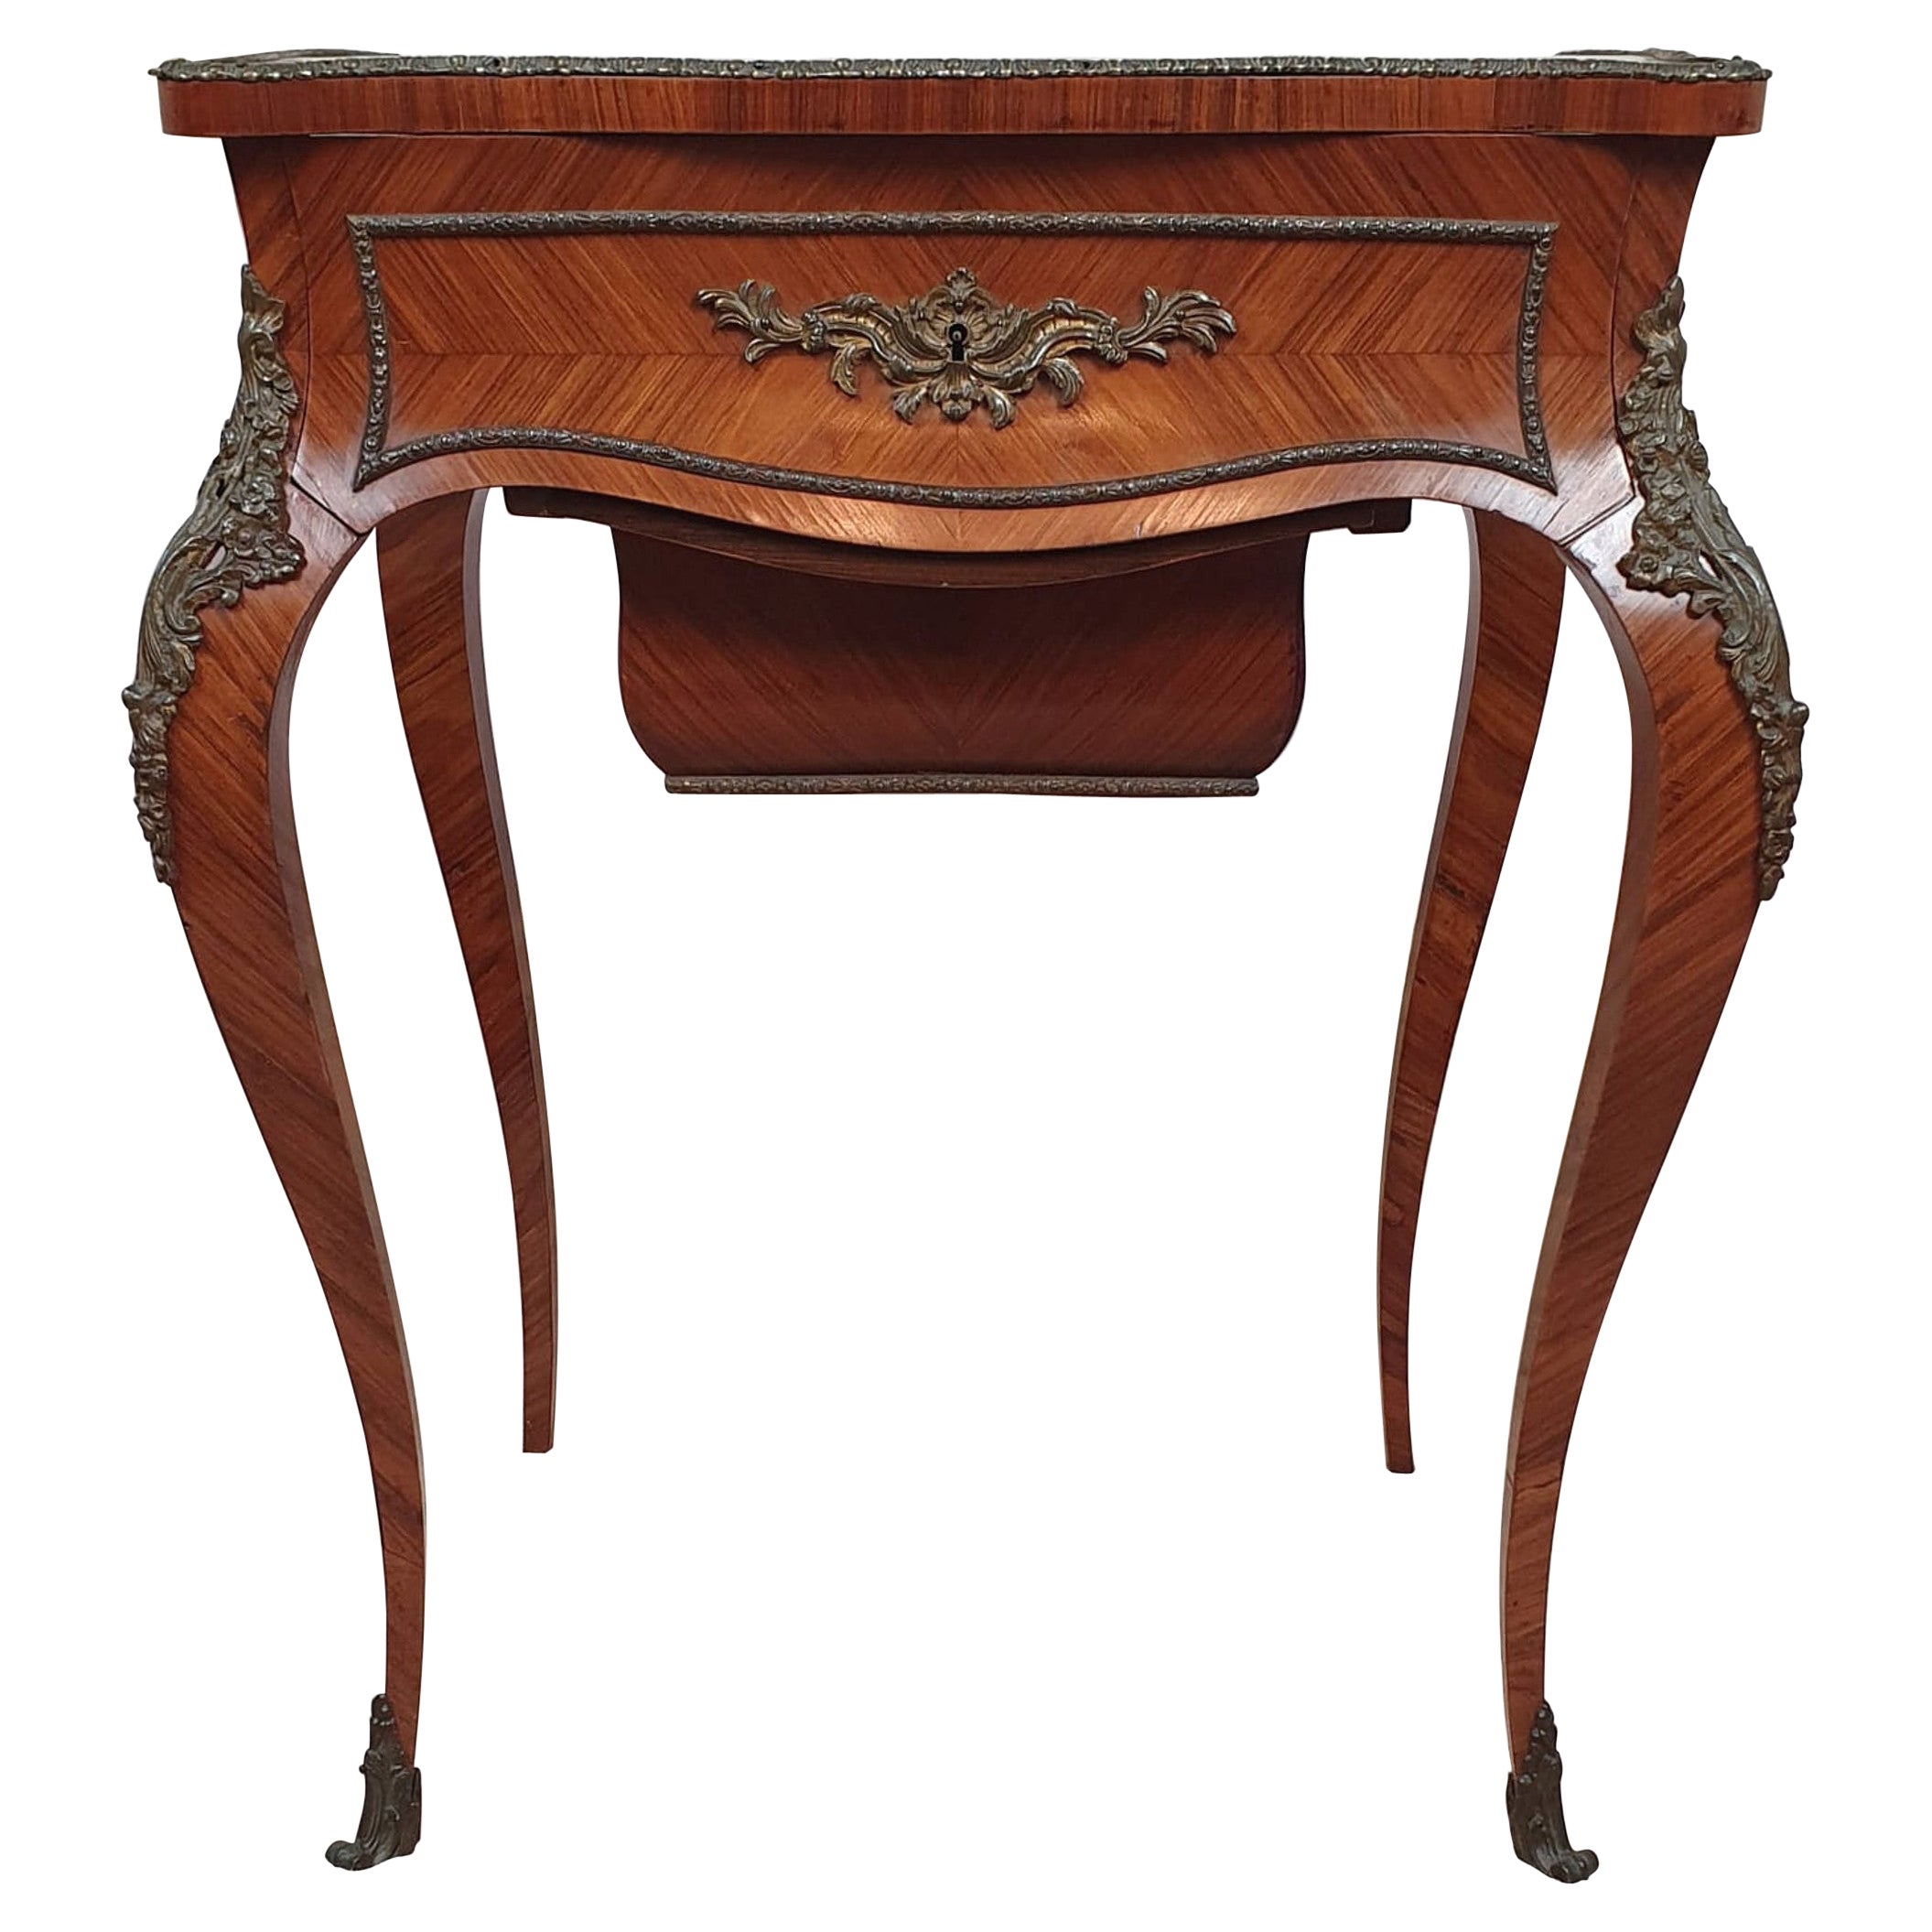 19th Century Kingwood Side or Work Table with Ormolu Mounts For Sale